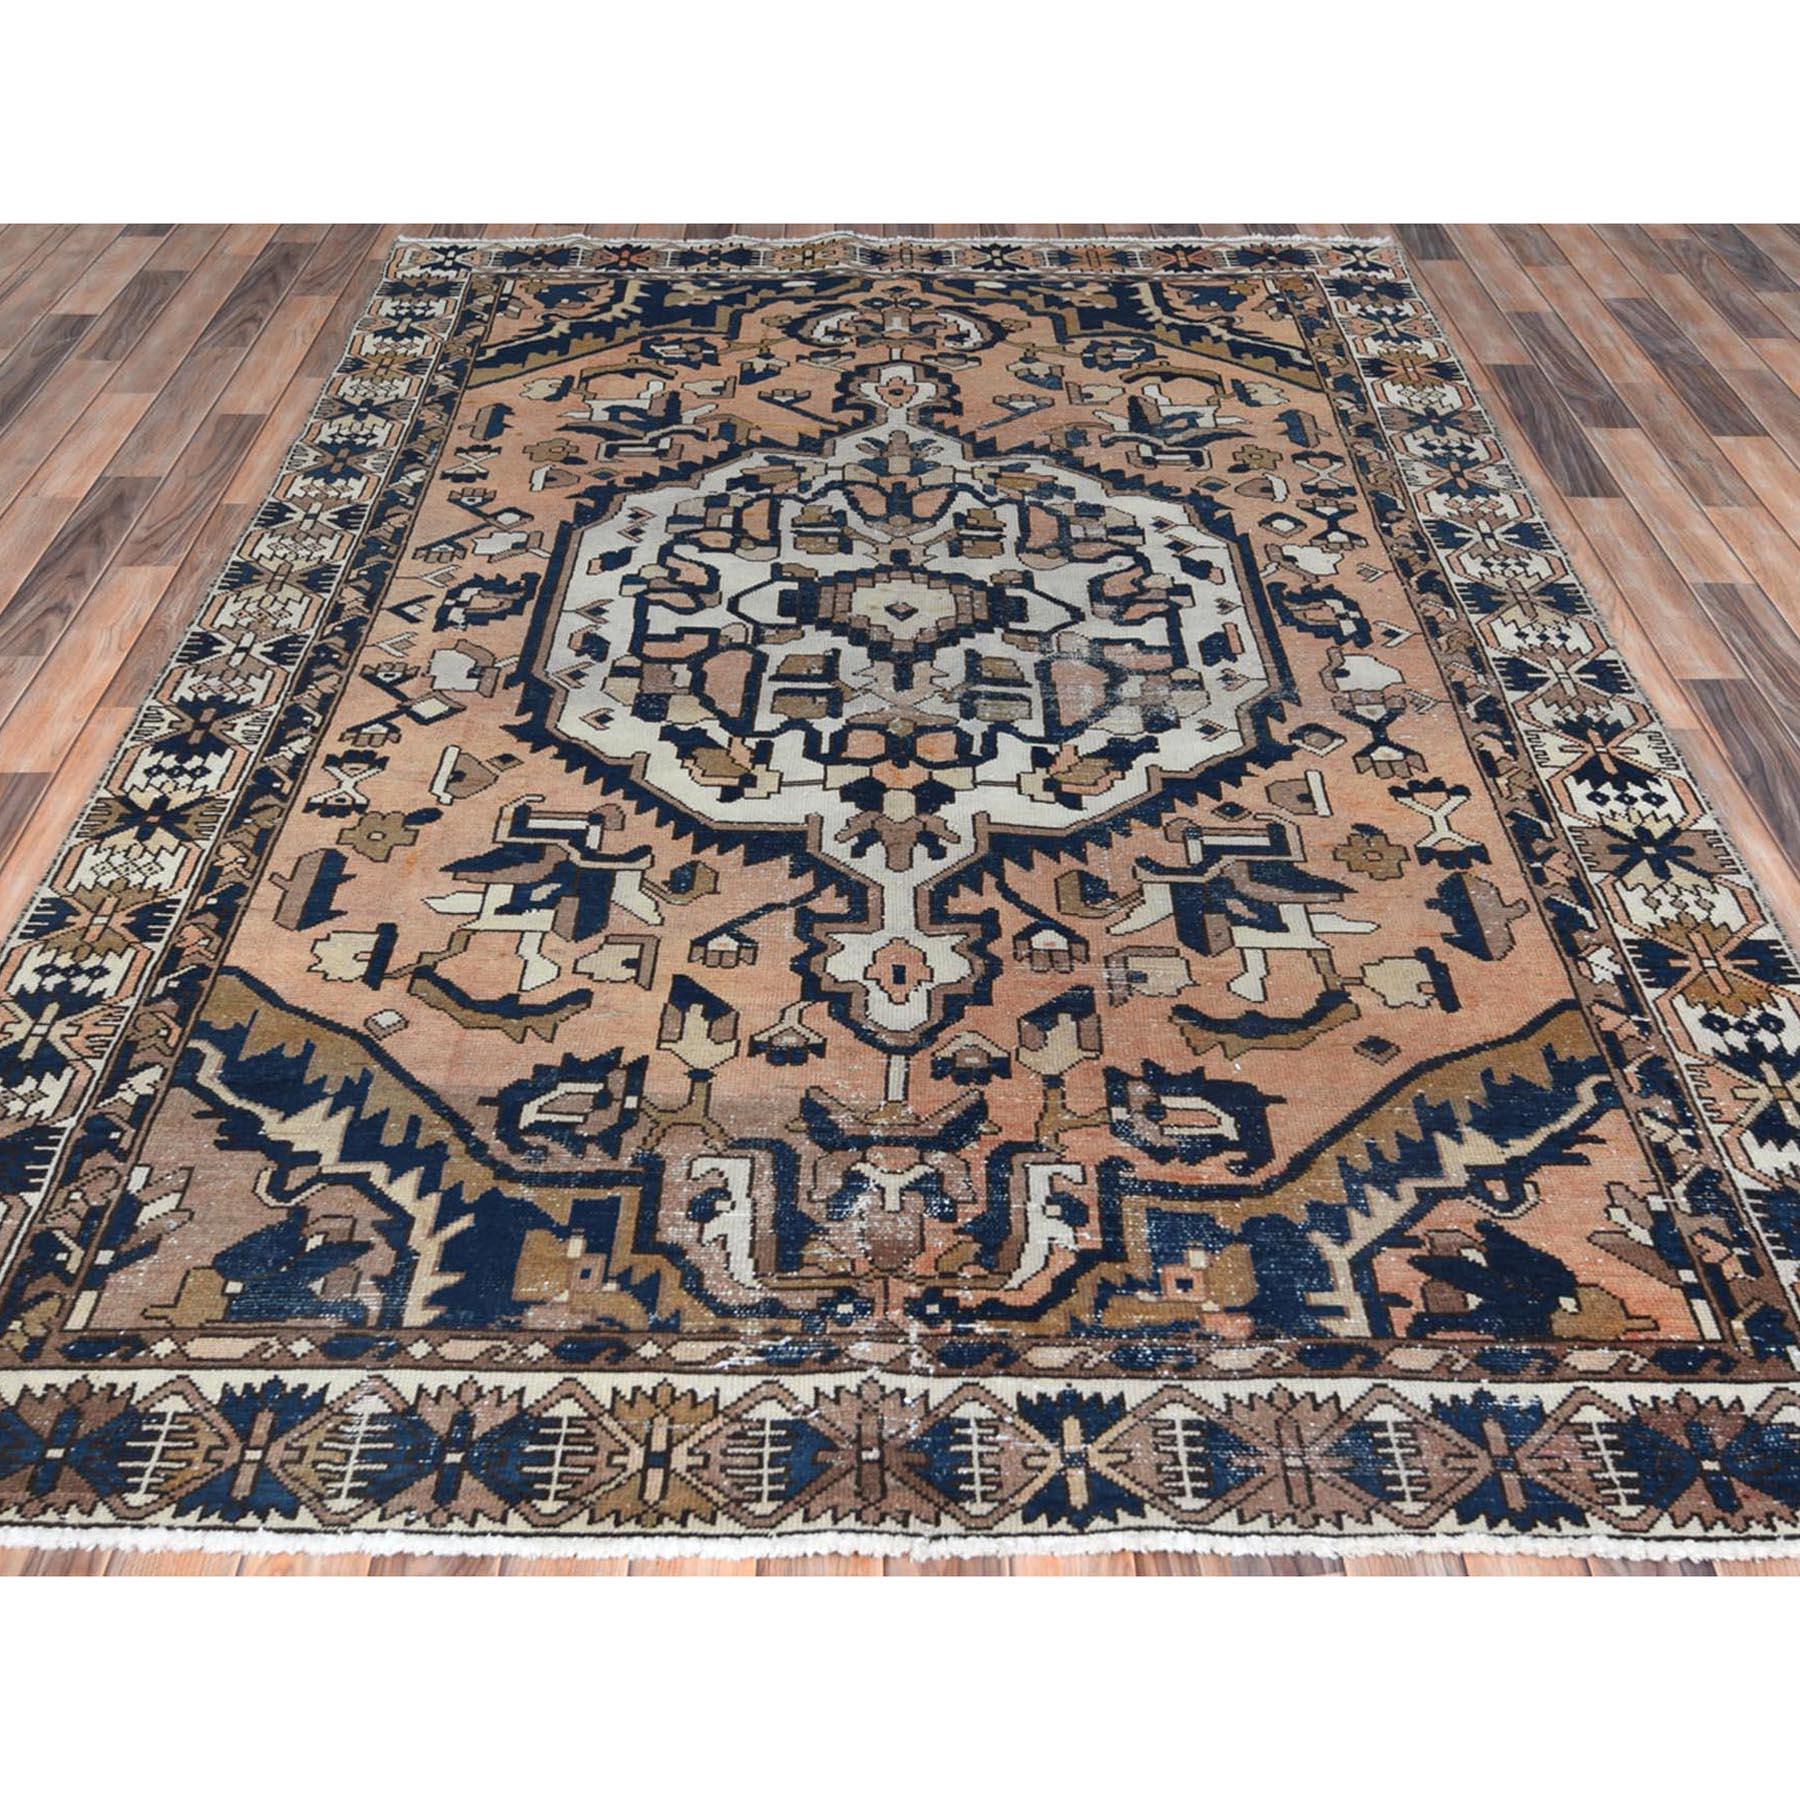 Medieval Apricot Color, Hand Knotted Vintage Northwest Persian, Worn Wool Distressed Rug